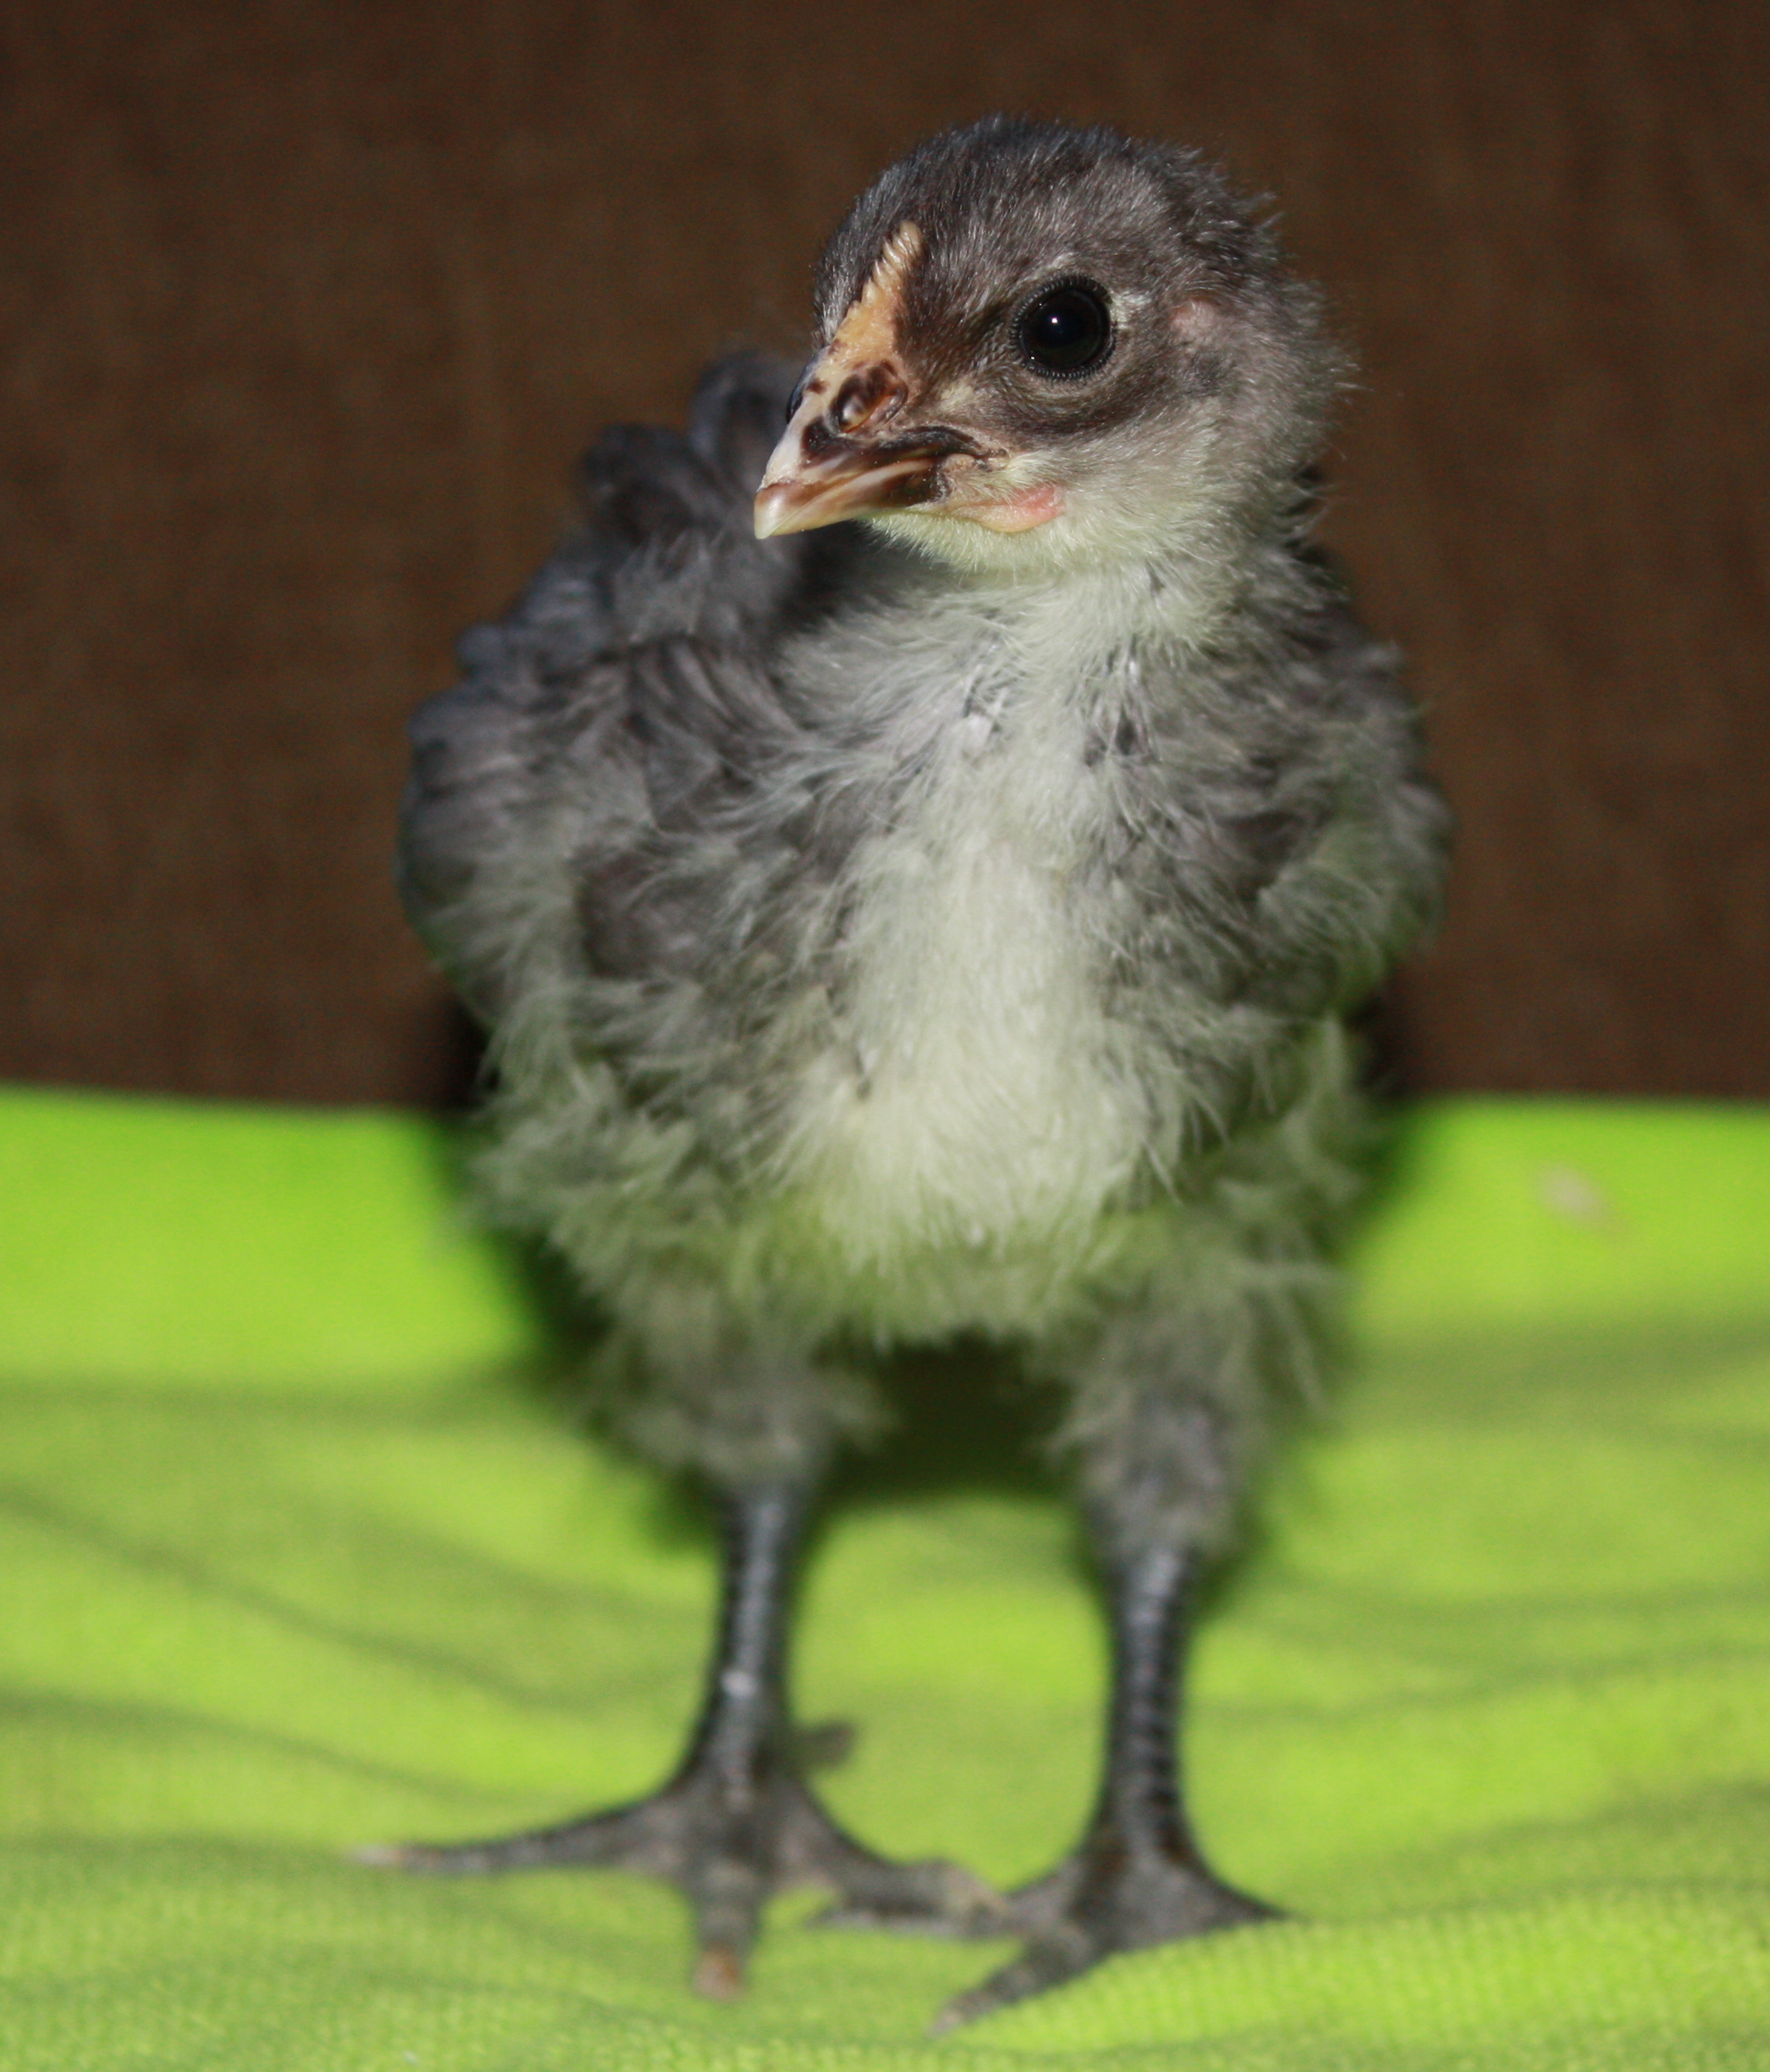 Blue/Black Splash Orpington - Pygmy (2.5 weeks)
Showing signs of being a rooster.